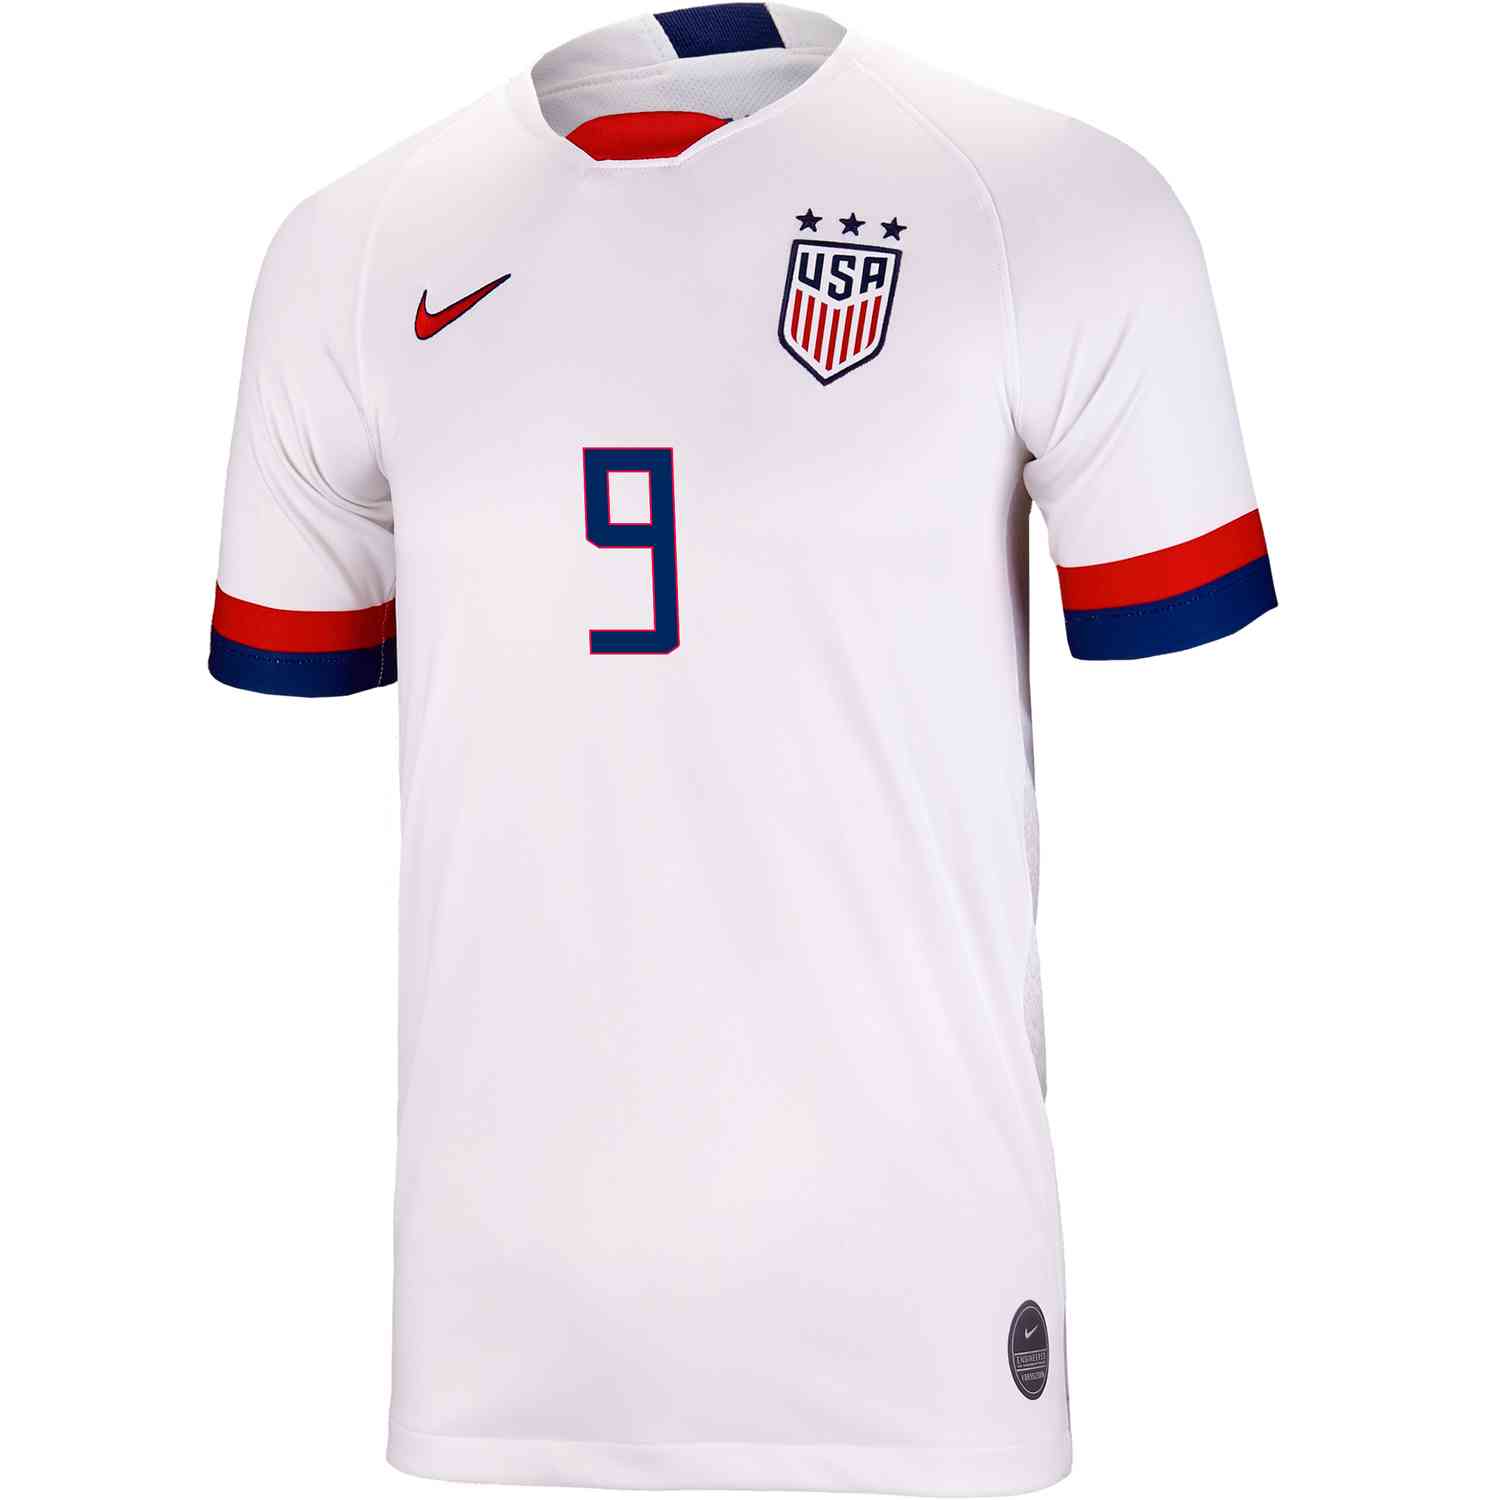 2023 Nike USWNT (4-Star) Home Jersey - Soccer Master